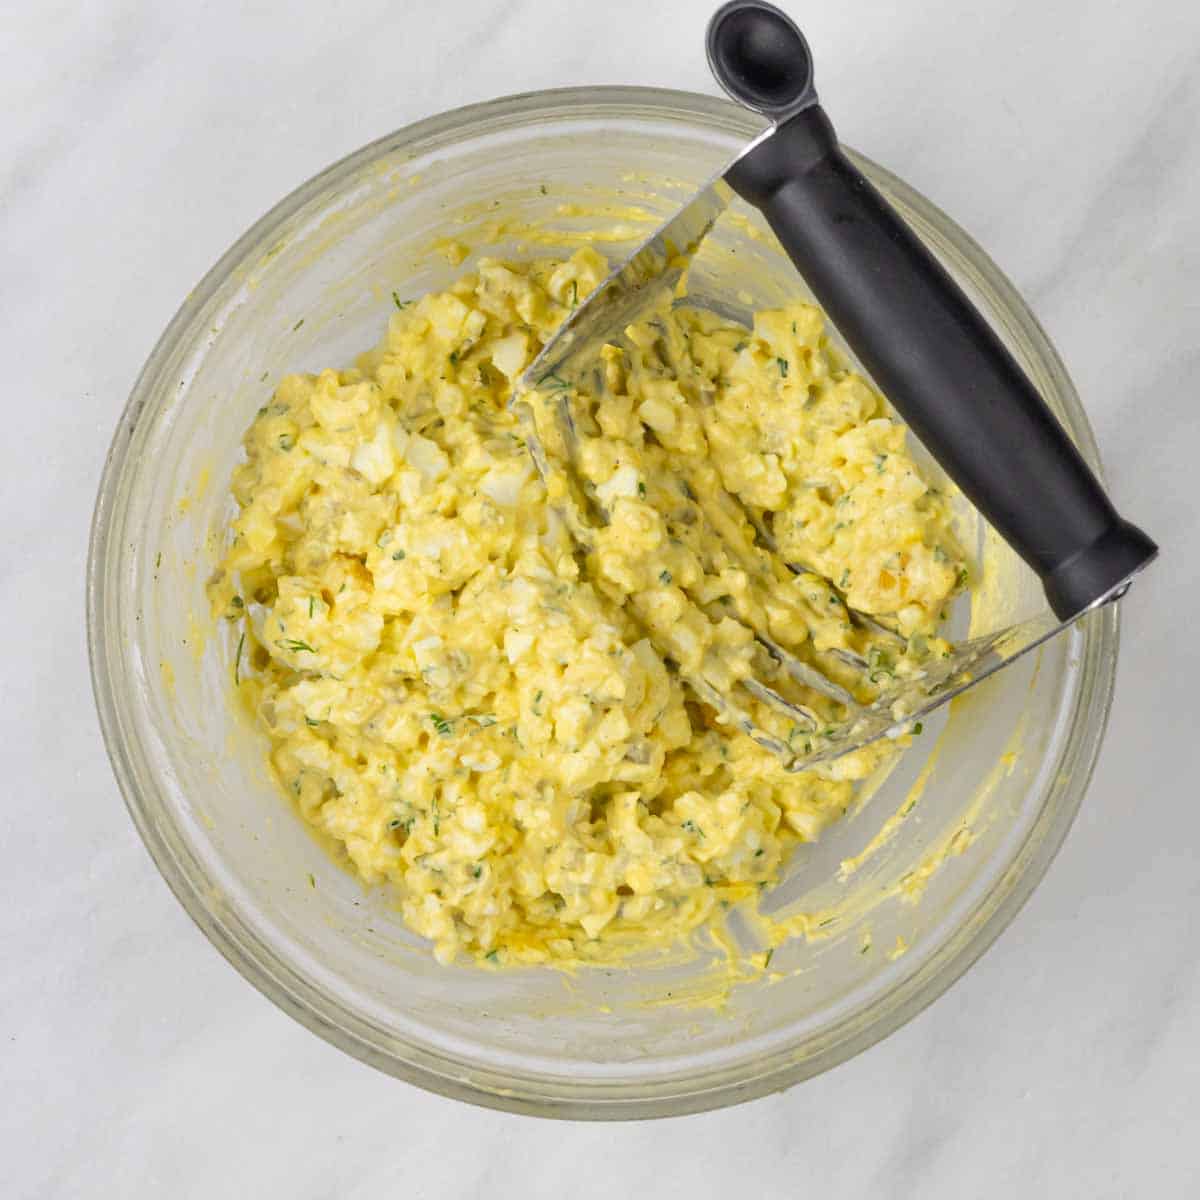 Ingredients for egg salad mixed in a glass bowl using a pastry cutter.